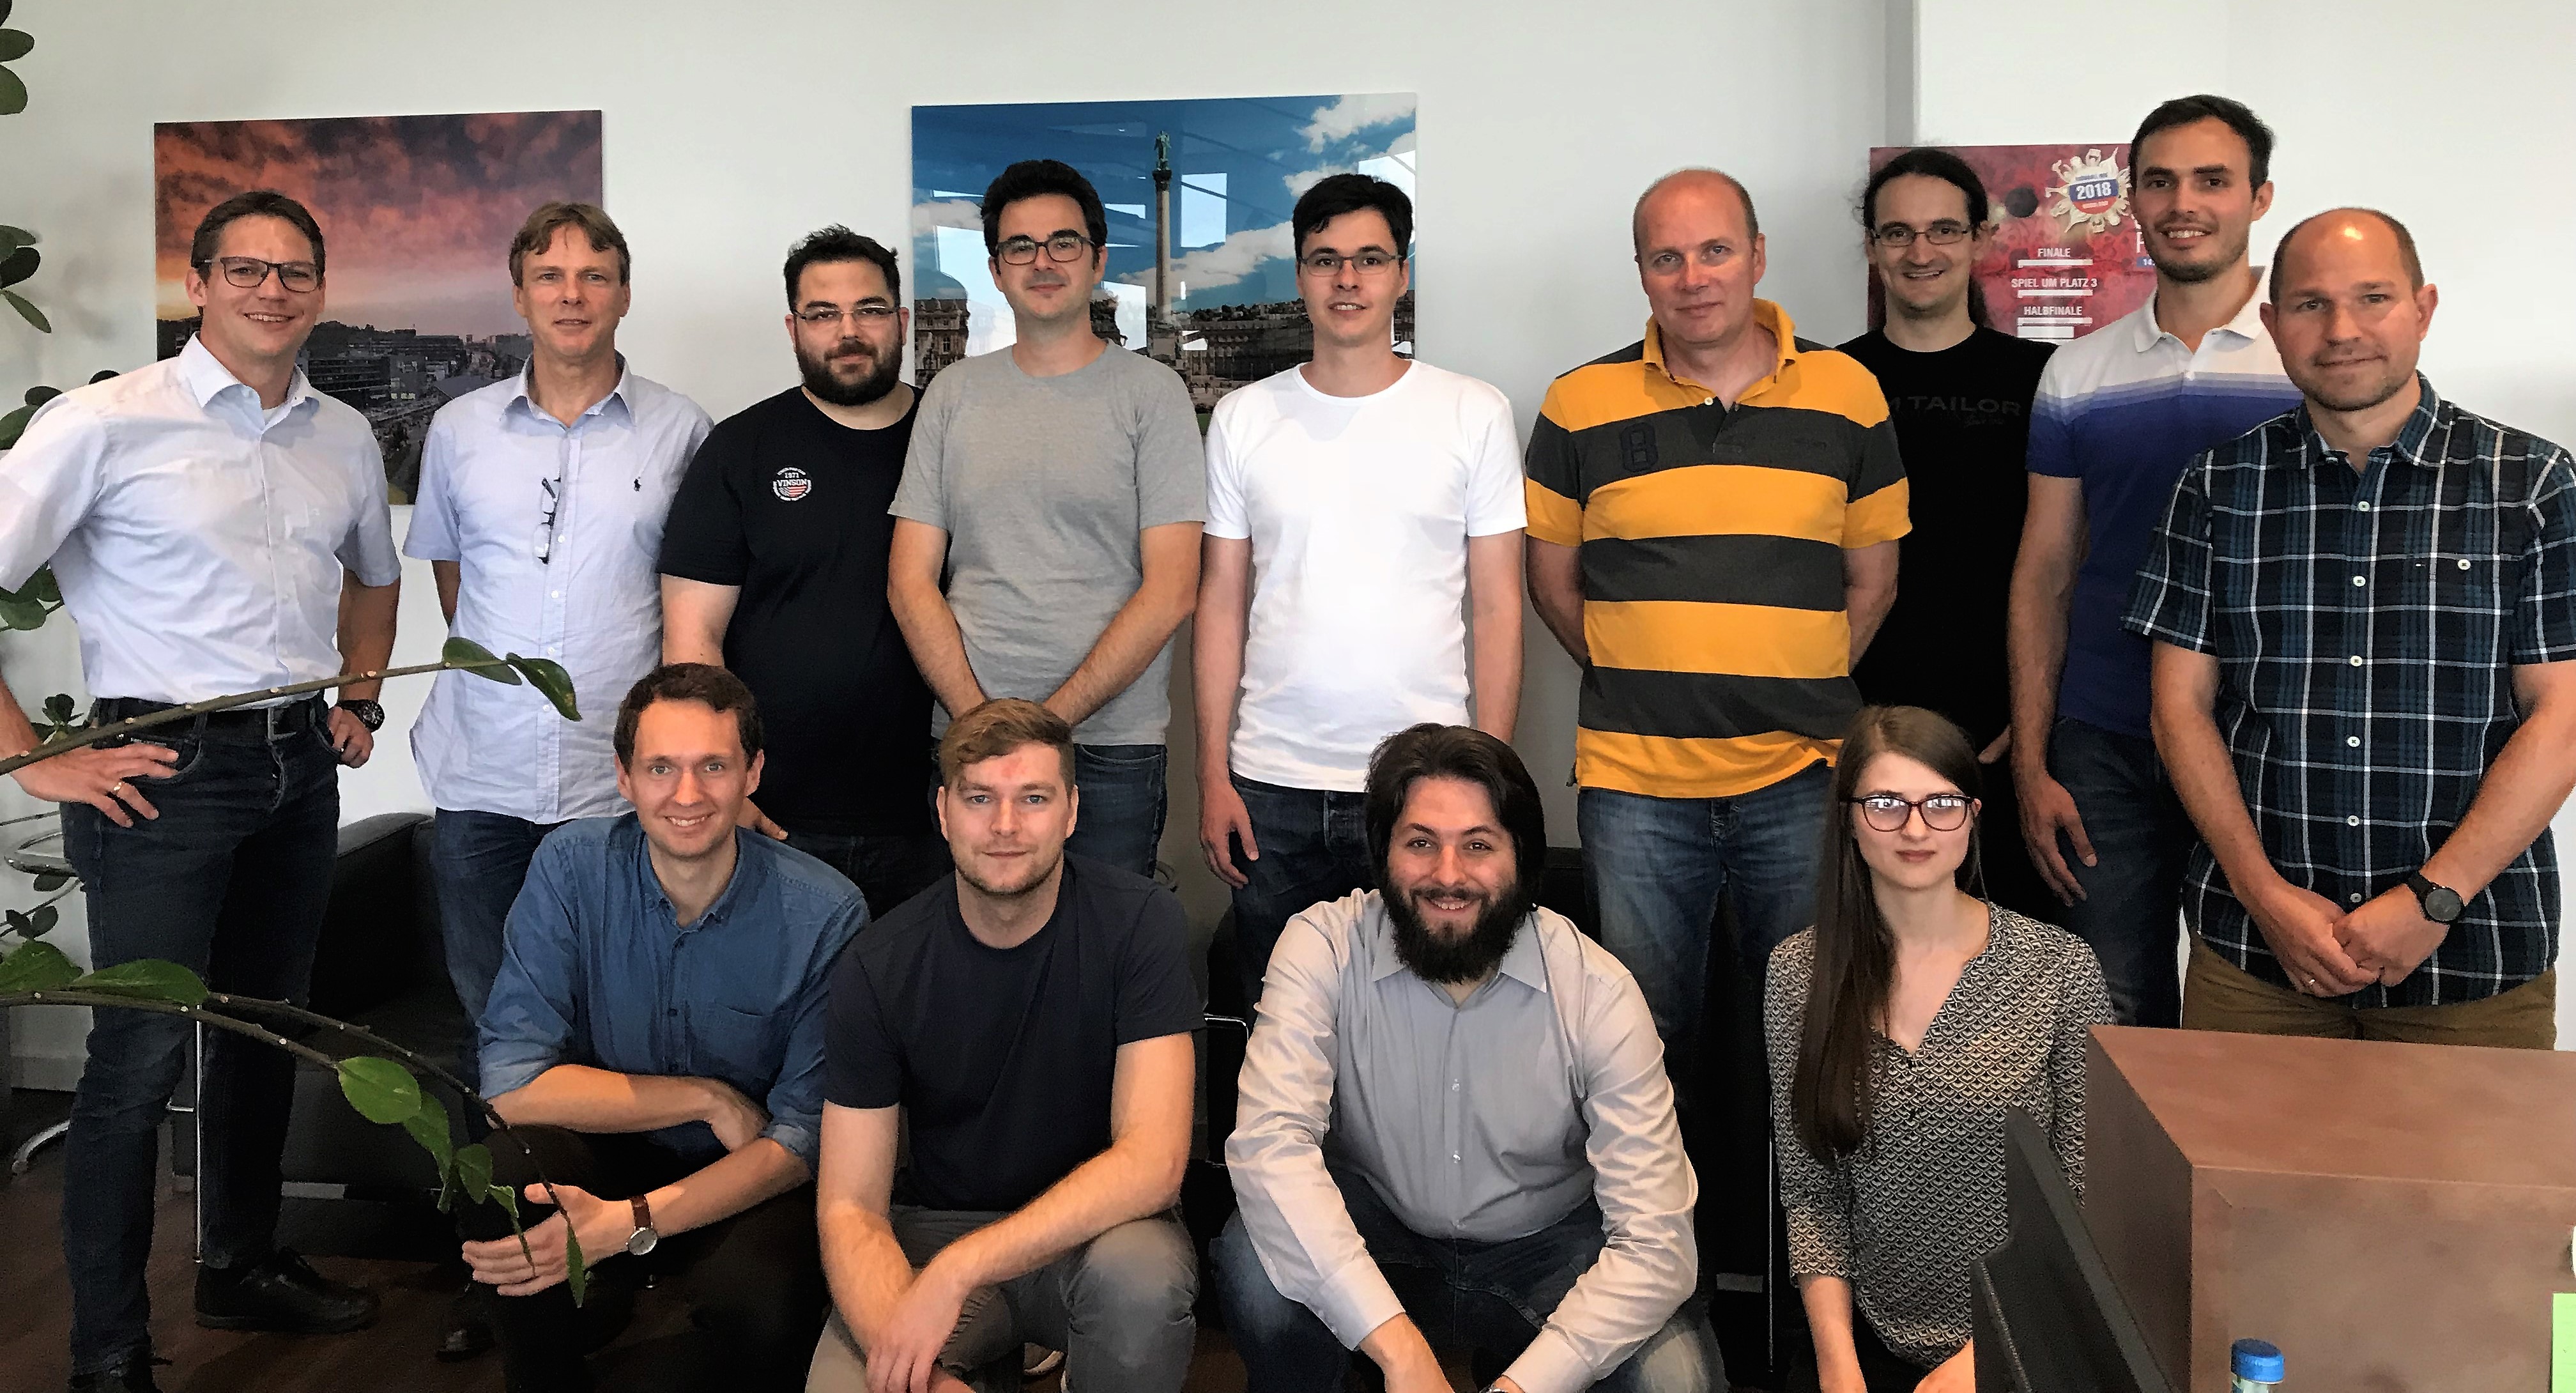 The AutoMon team and guests